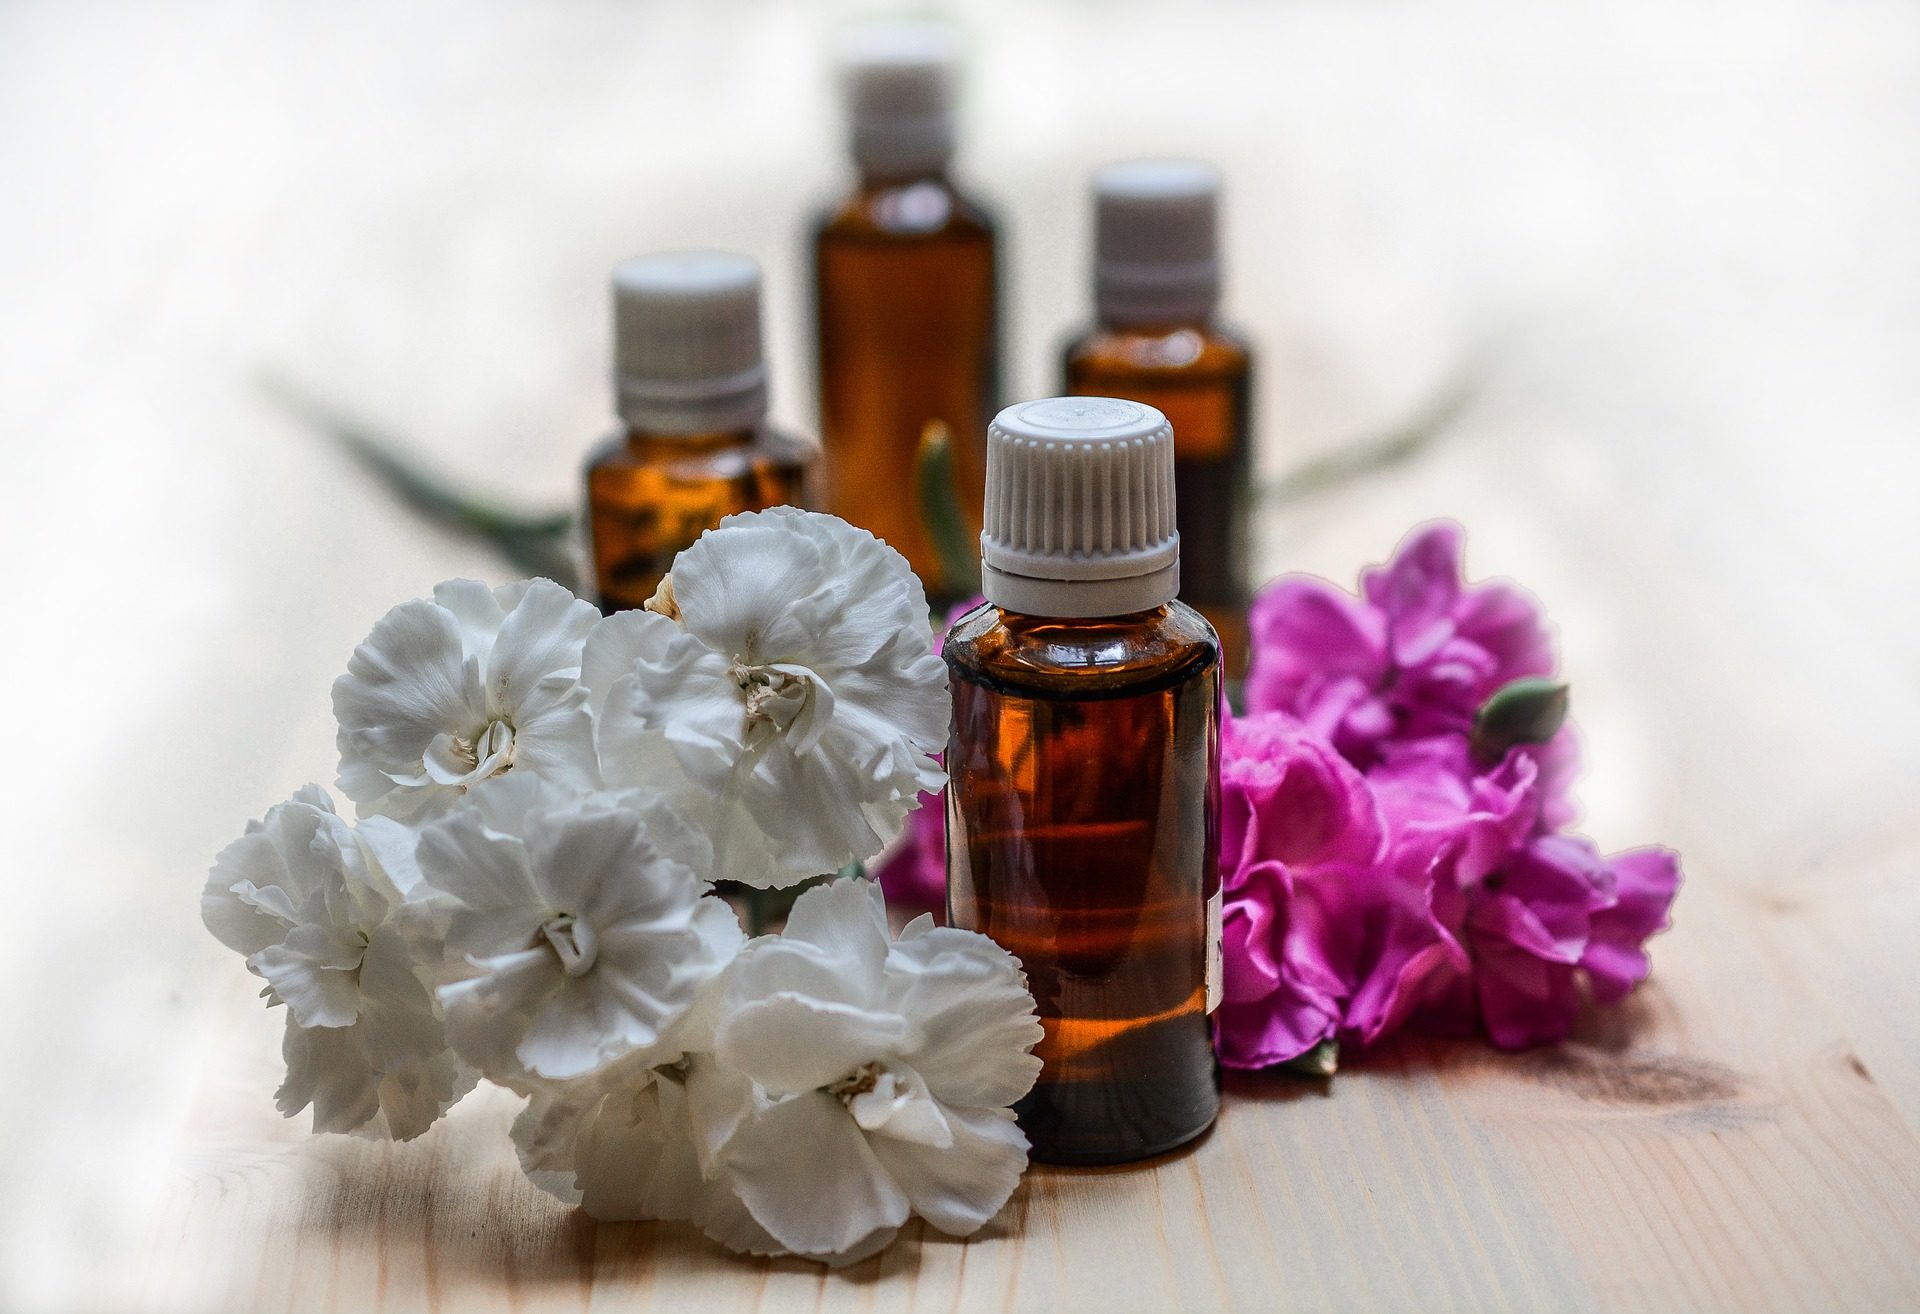 The spiritual benefits of essential oils are nearly impossible to measure and marketers capitalize on consumers' willingness to accept the possibility. (Photo courtesy Pixabay)